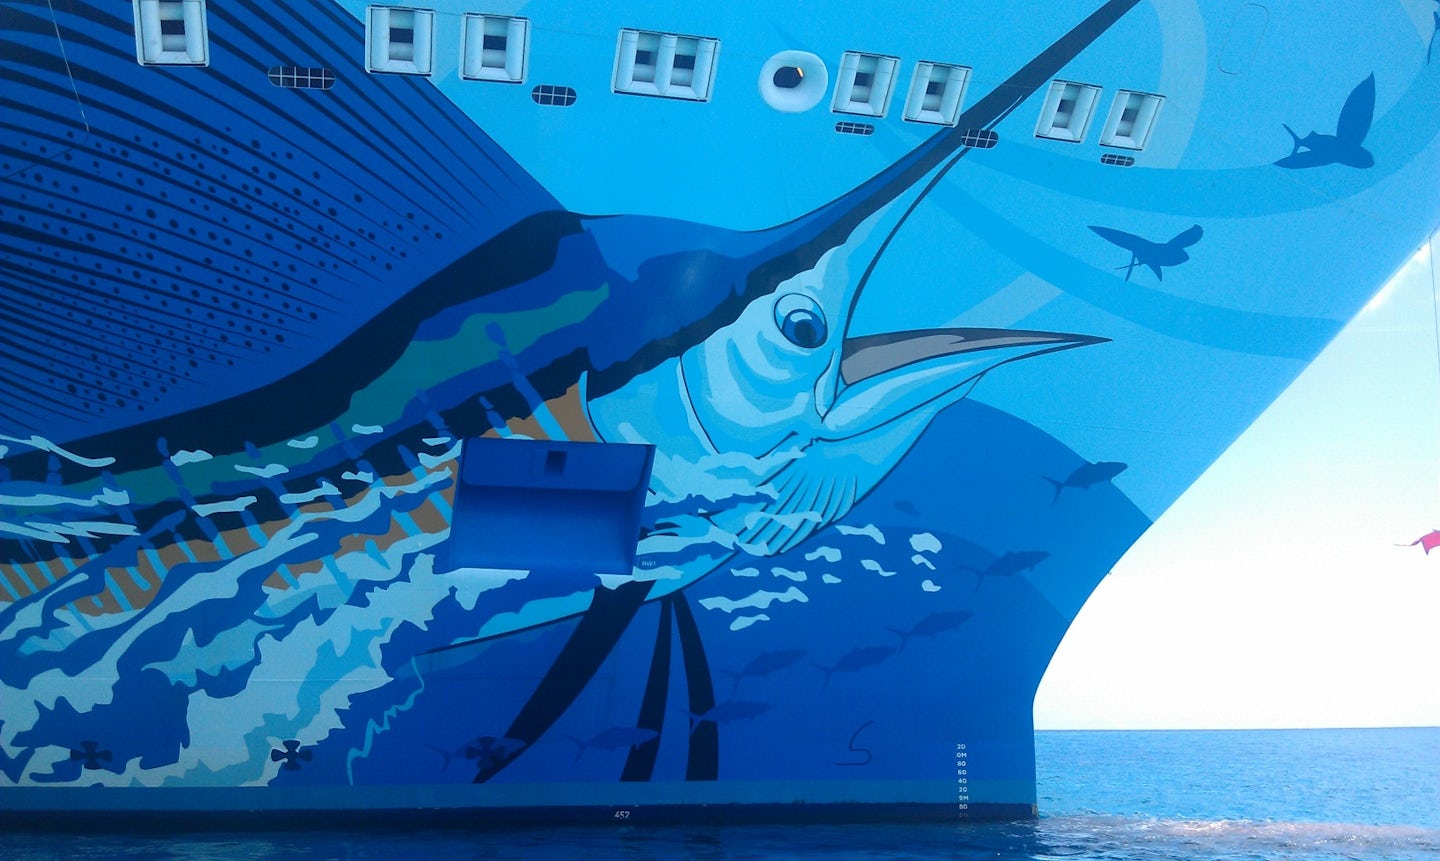 Guy Harvey Painting on the Ship